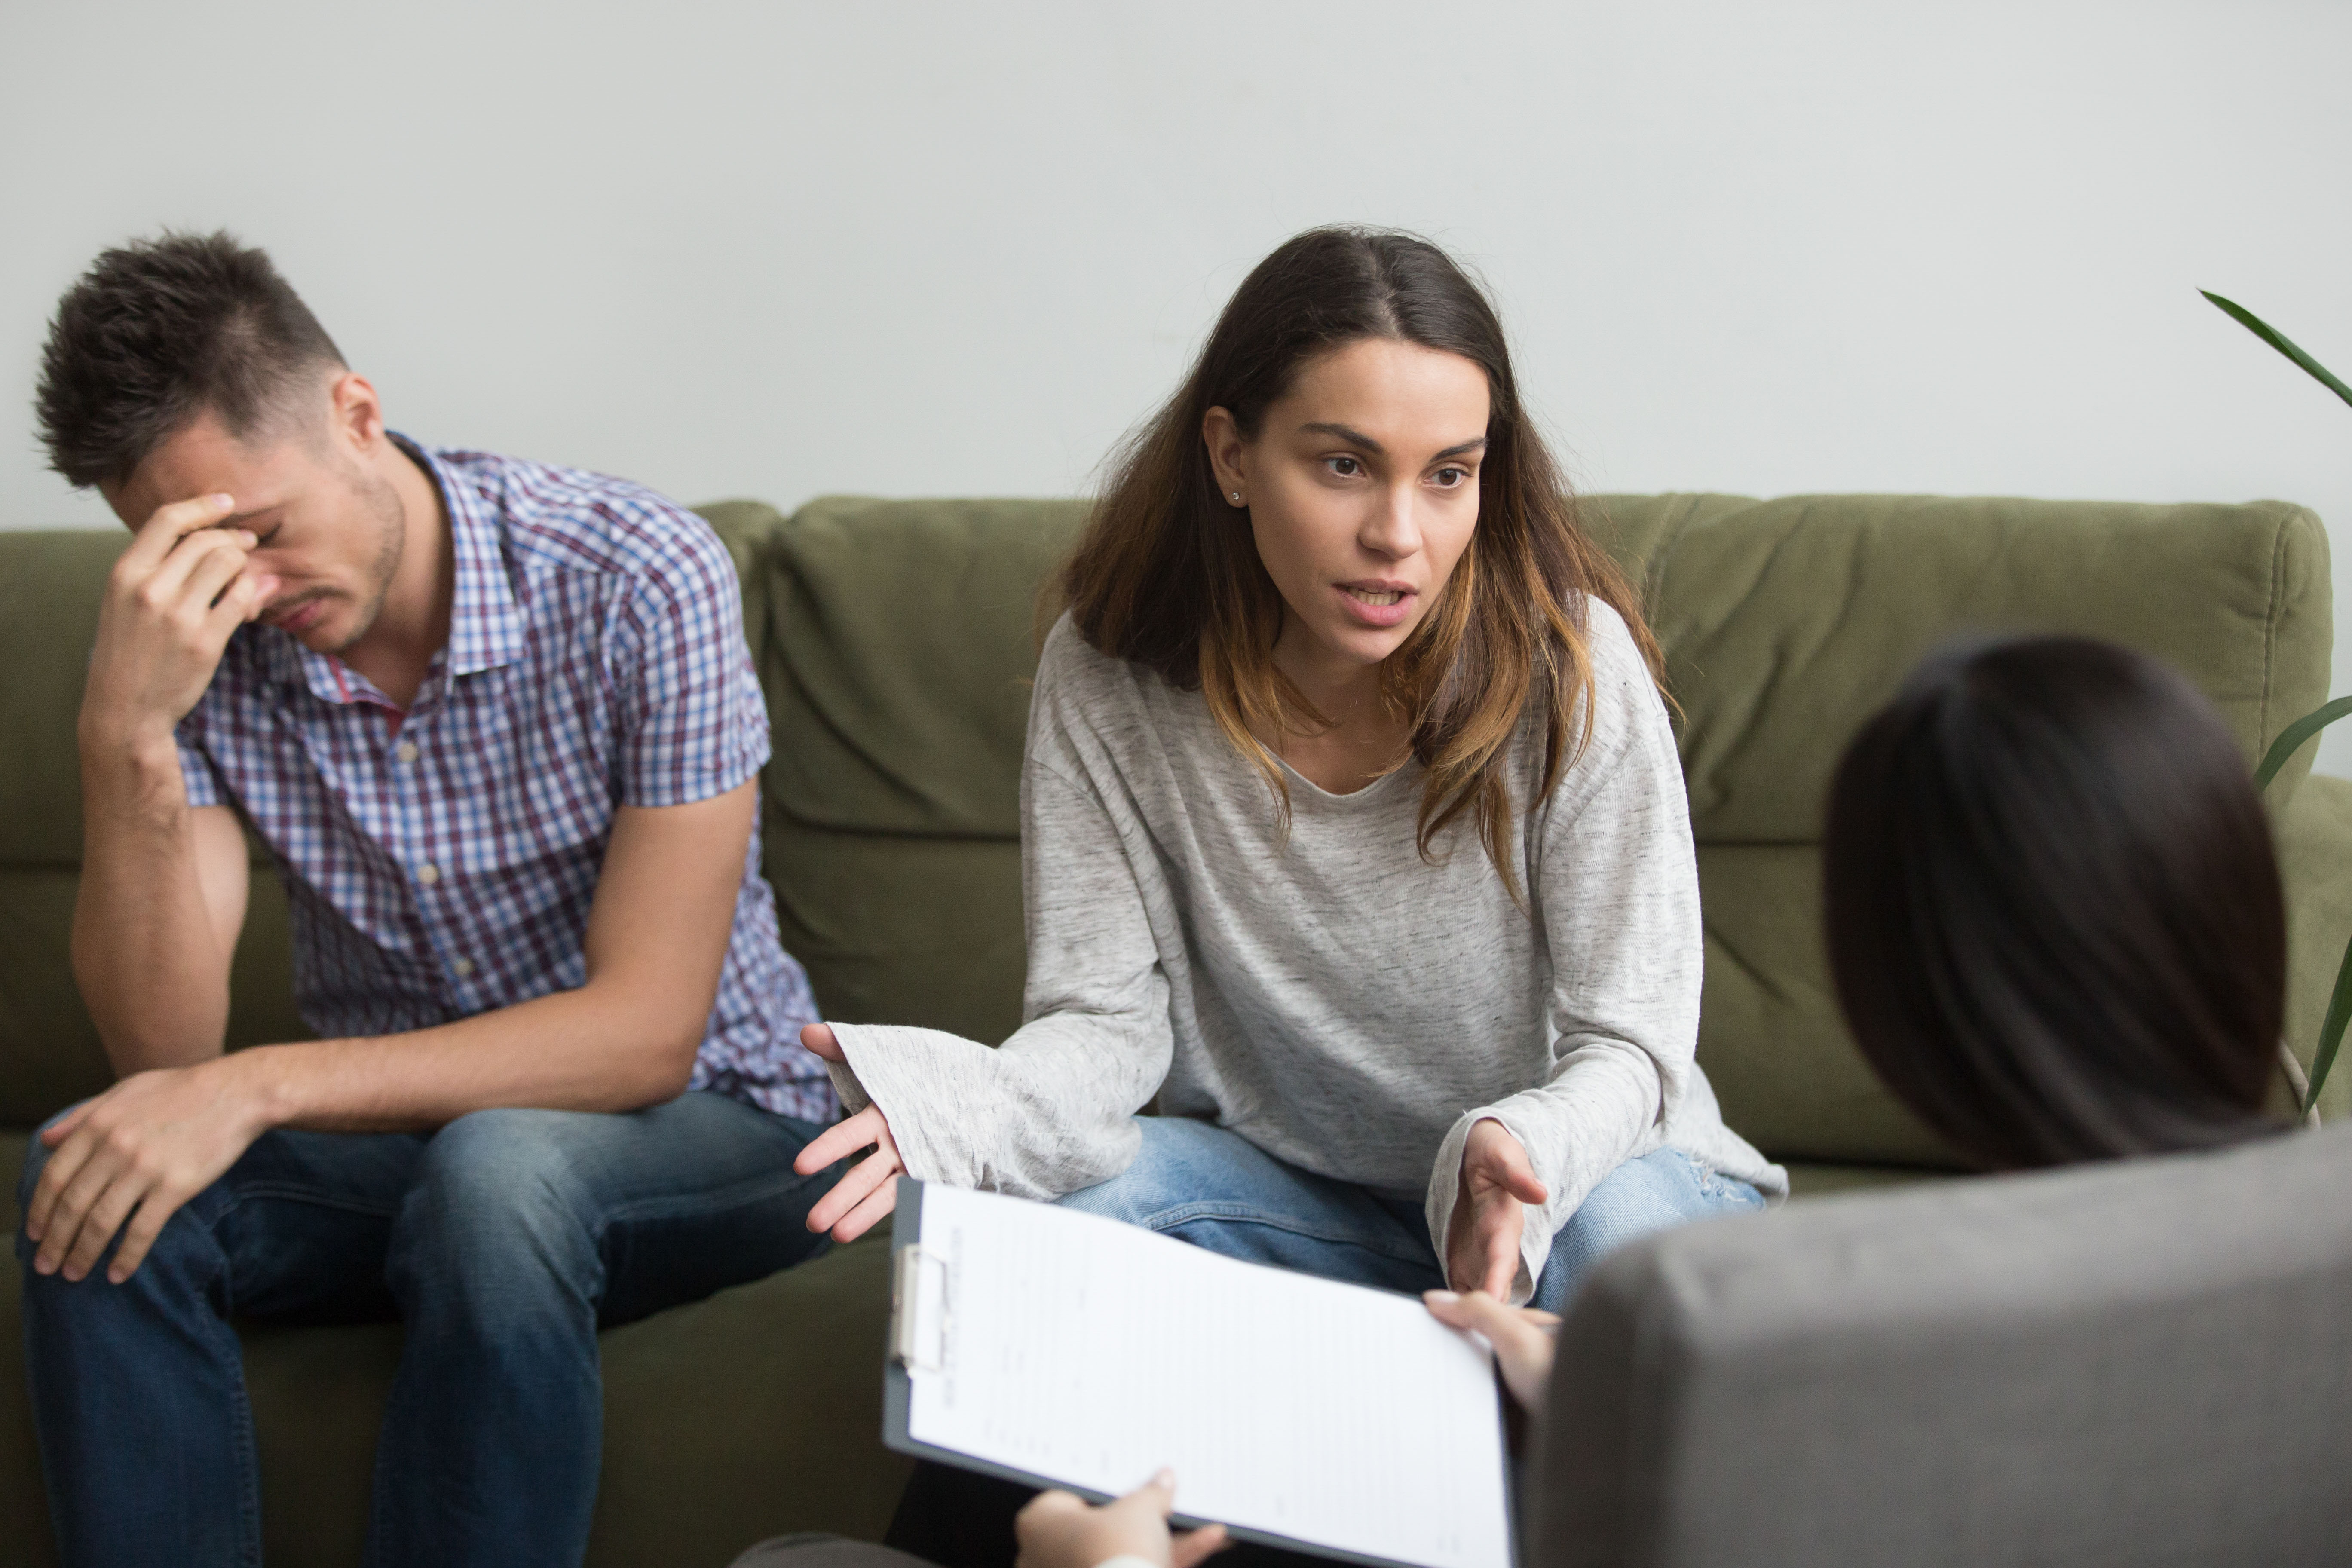 Frustrated stressed wife talks to psychologist about bad relationships sitting on couch with husband, unhappy woman sharing problems with counselor, couple counseling, family marriage therapy session